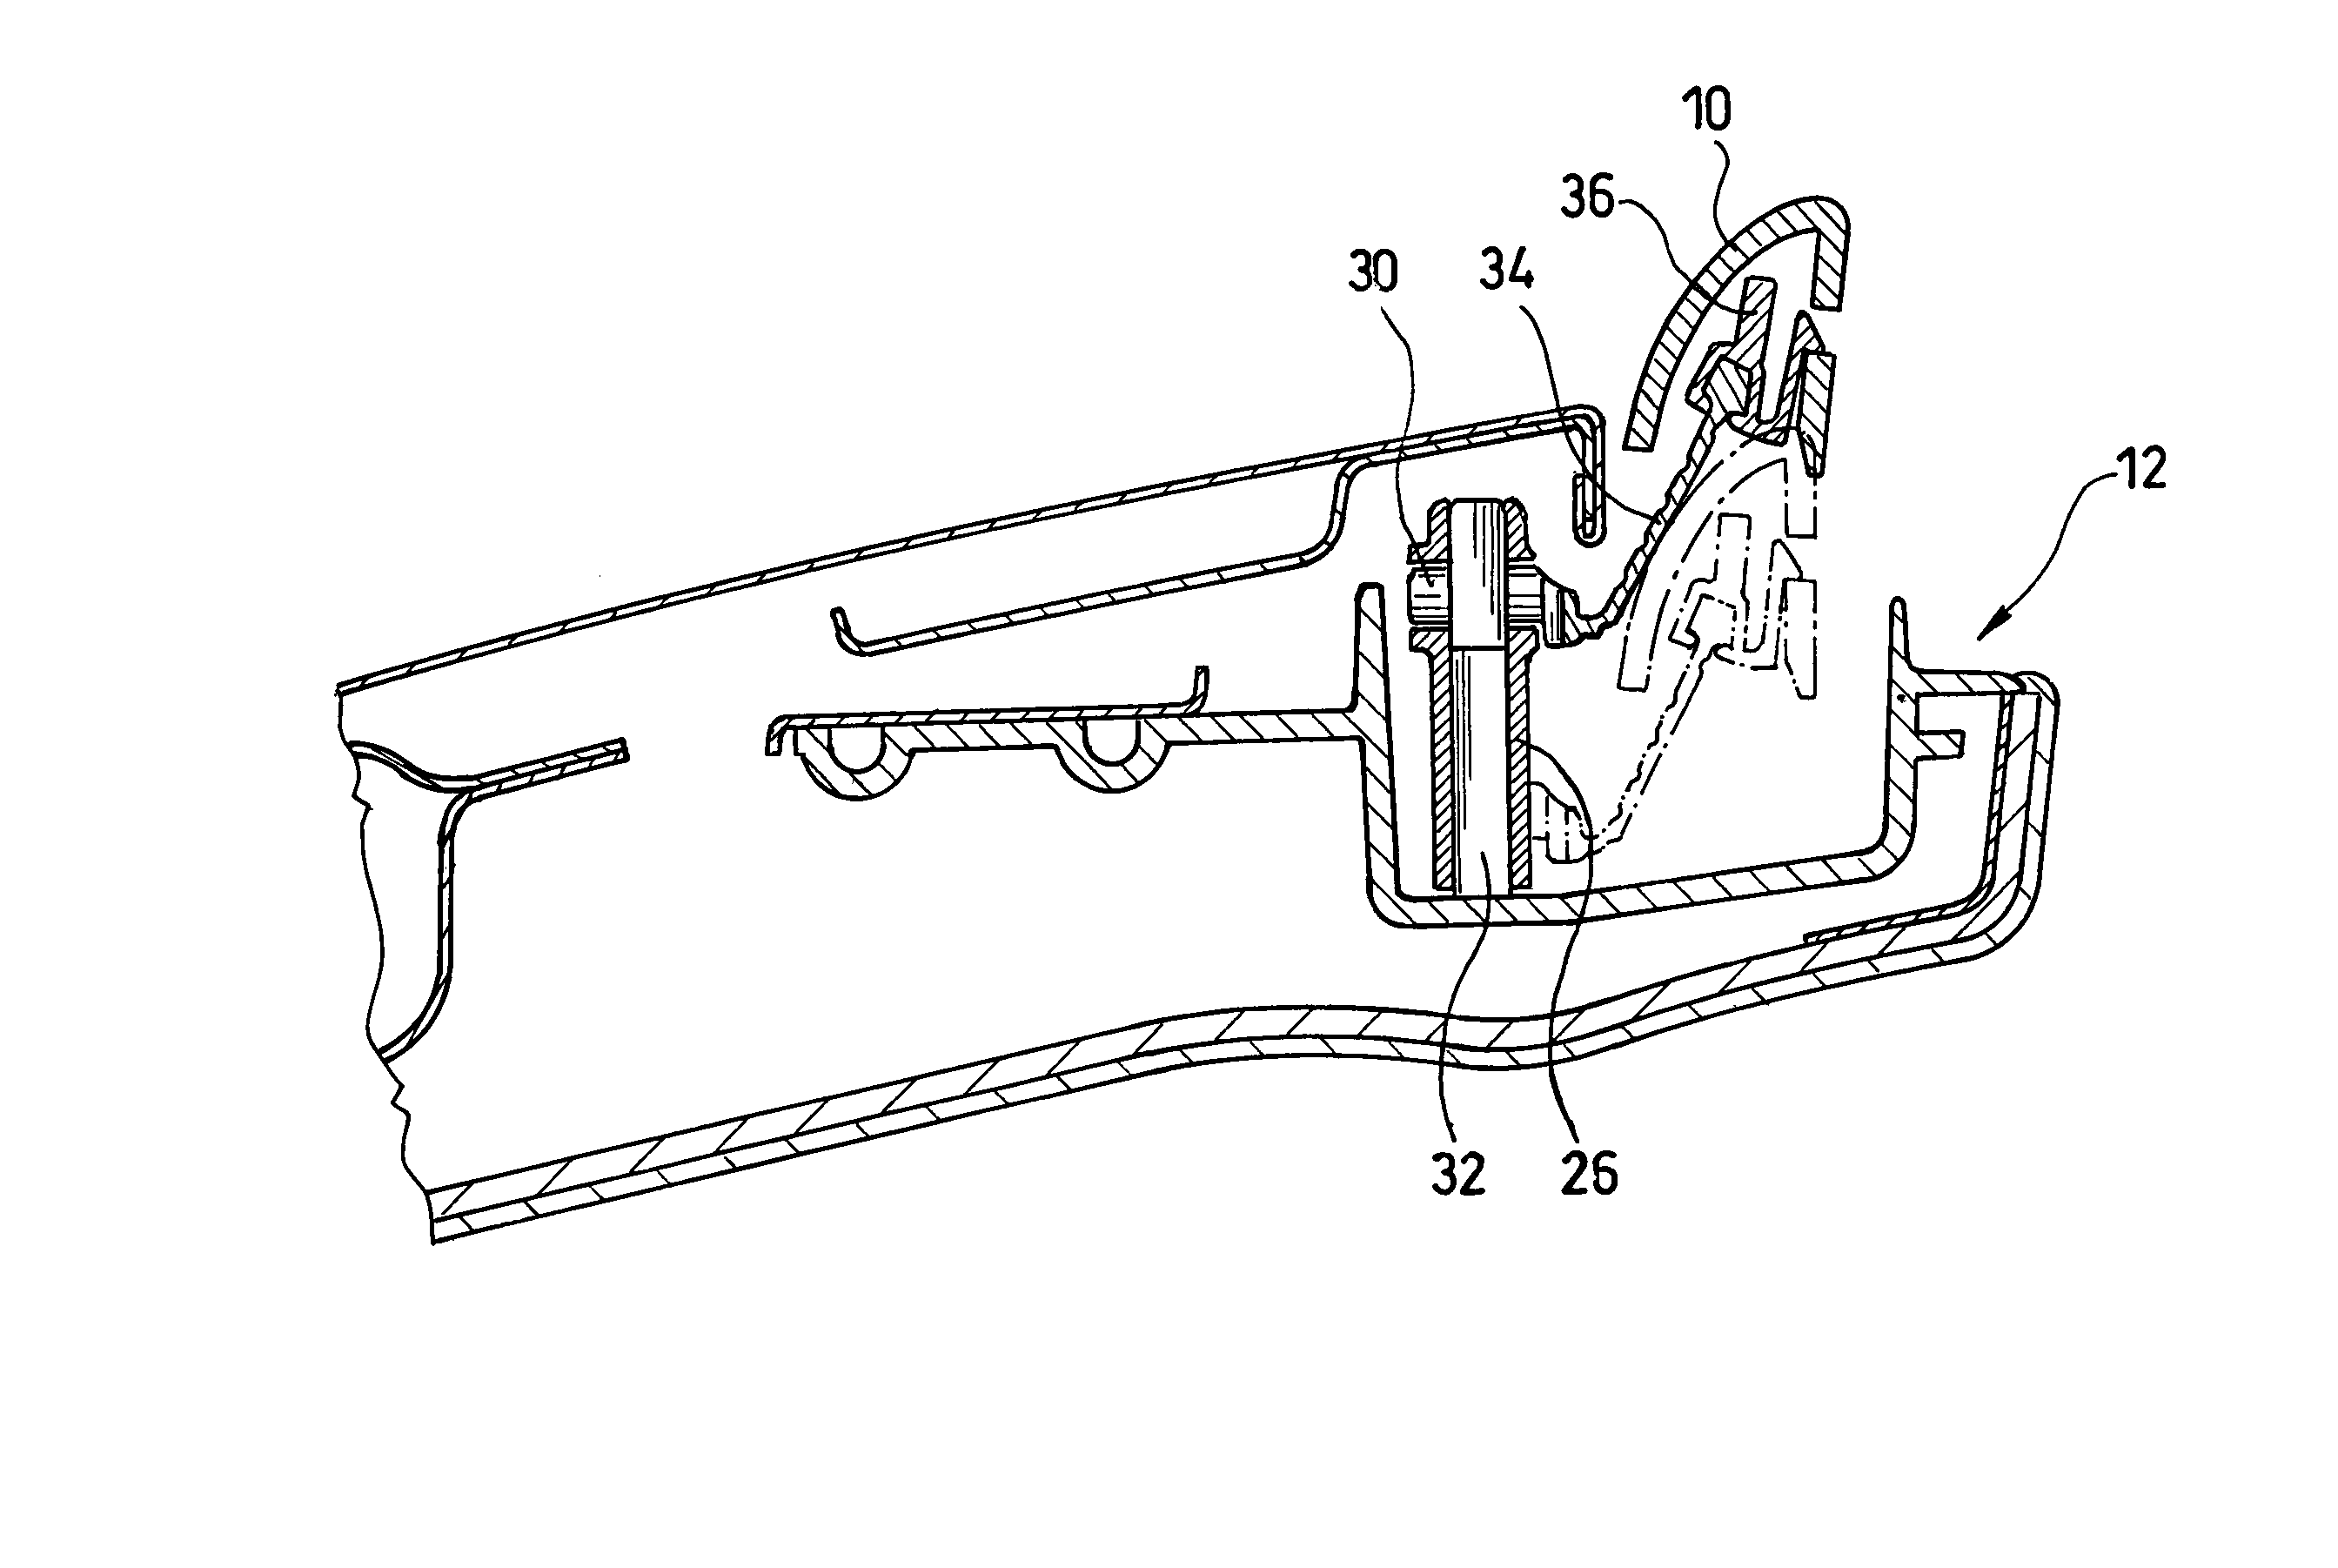 Motor vehicle roof with a roof opening and a wind deflector